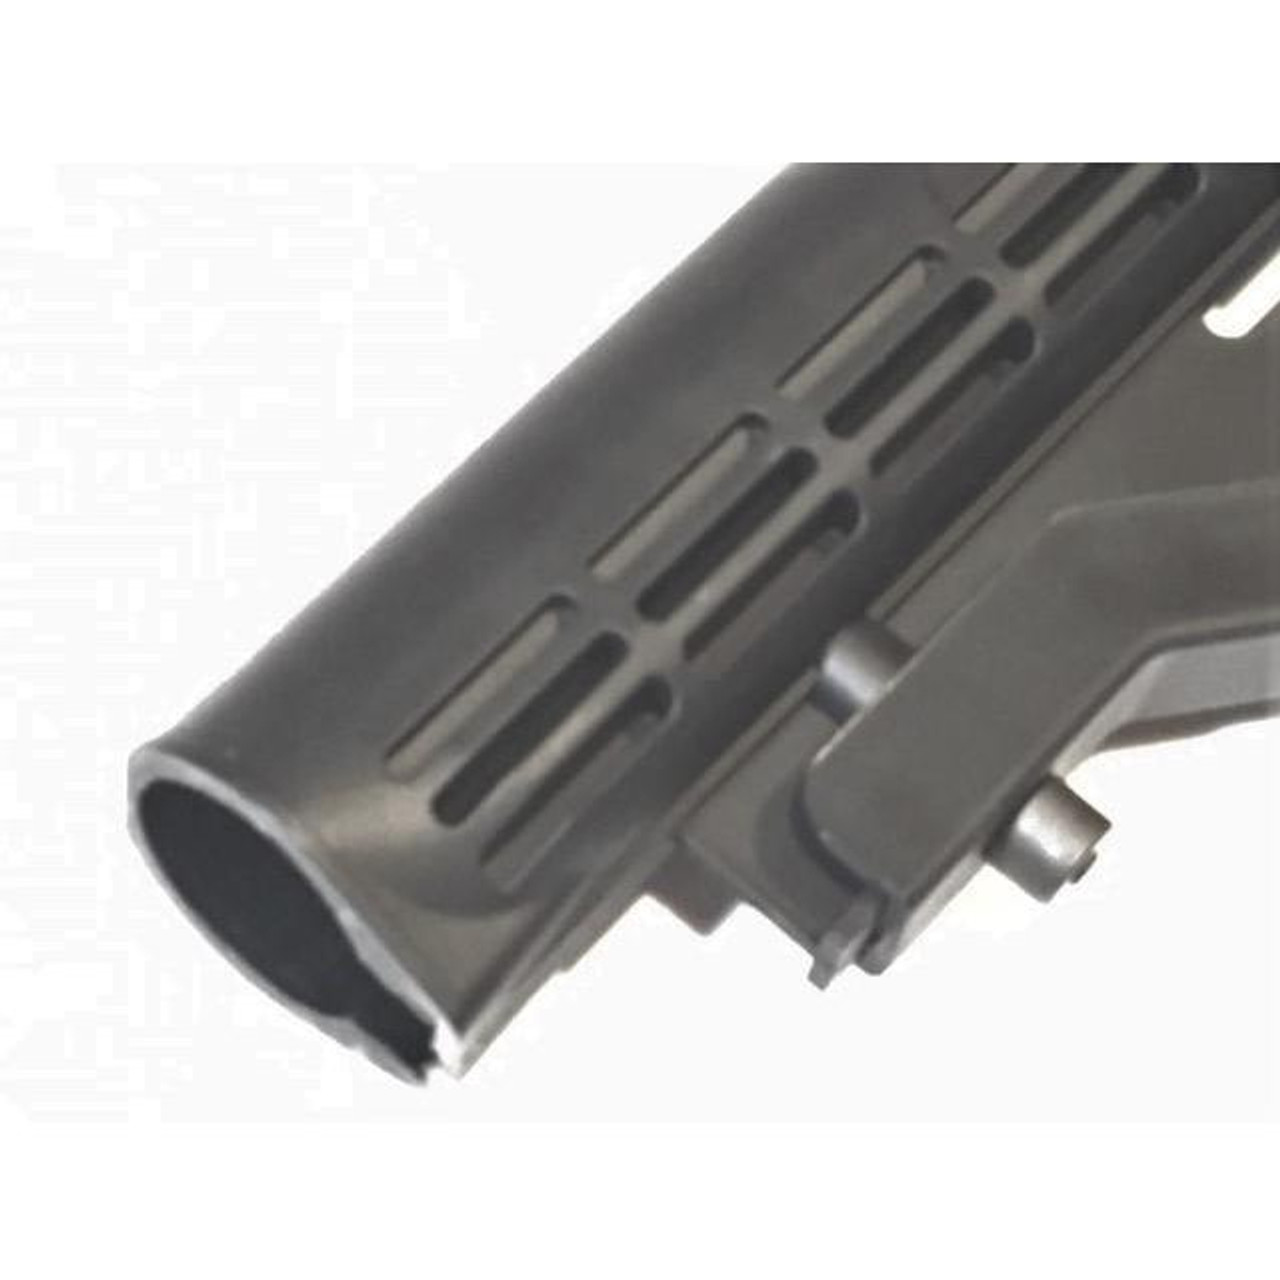 Rock River M4 waffle stock, Commercial